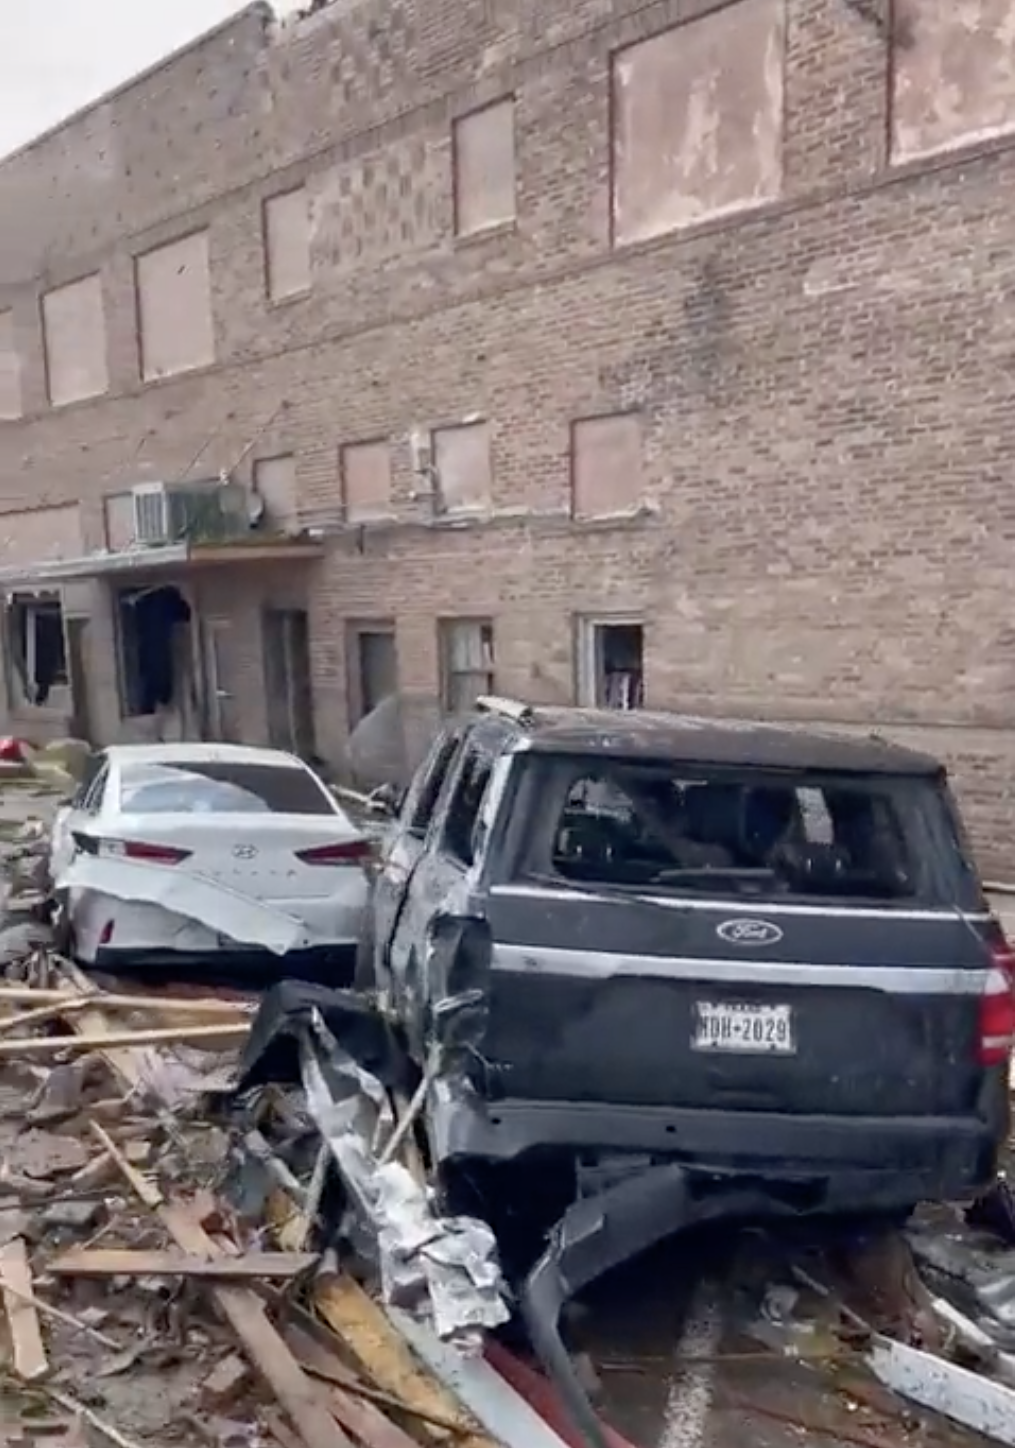 Damaged cars outside a building